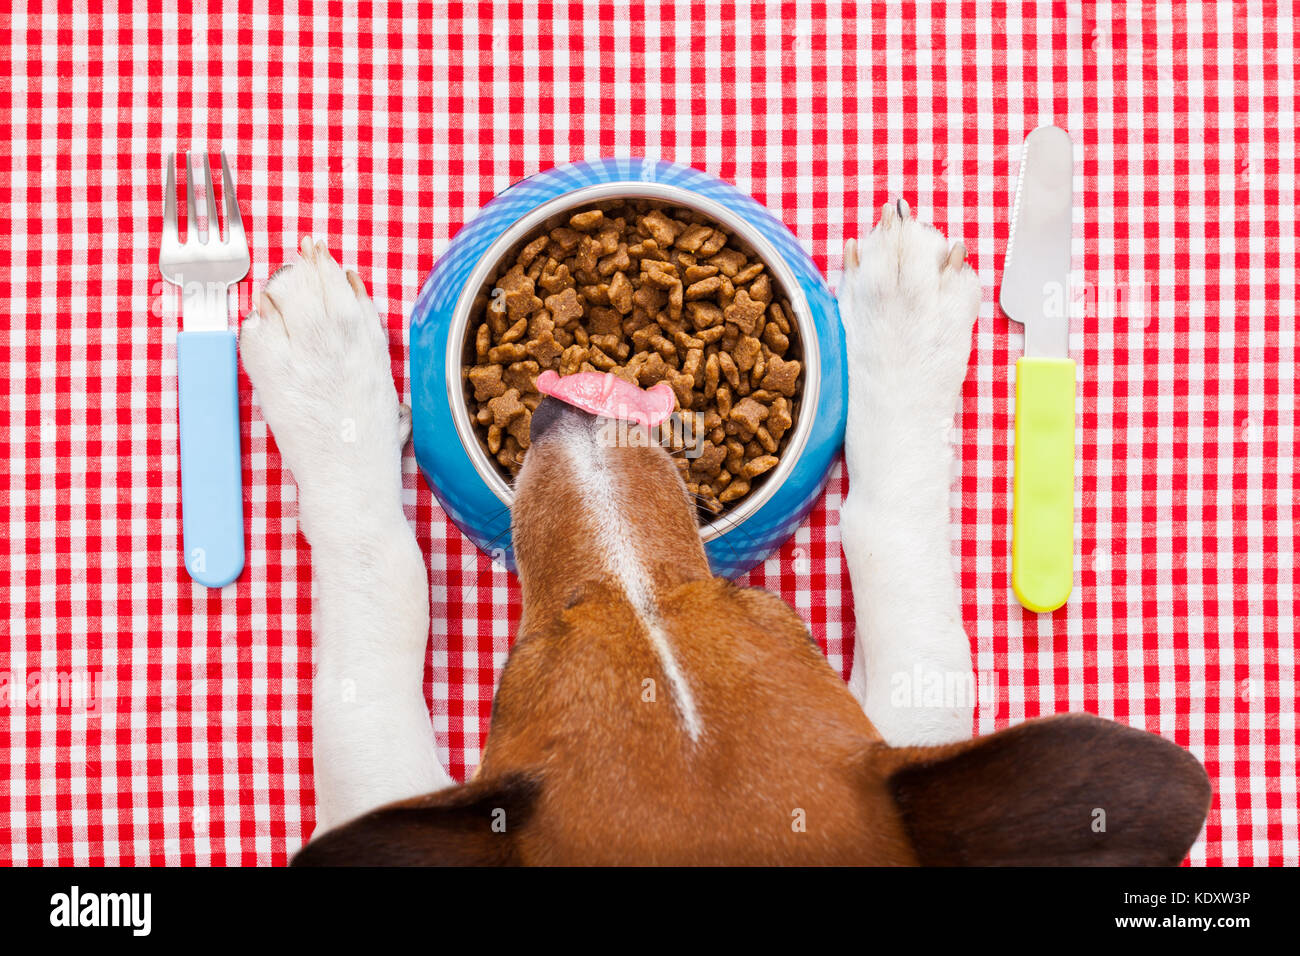 full dog food bowl with knife and fork on tablecloth,paws and head of a dog Stock Photo